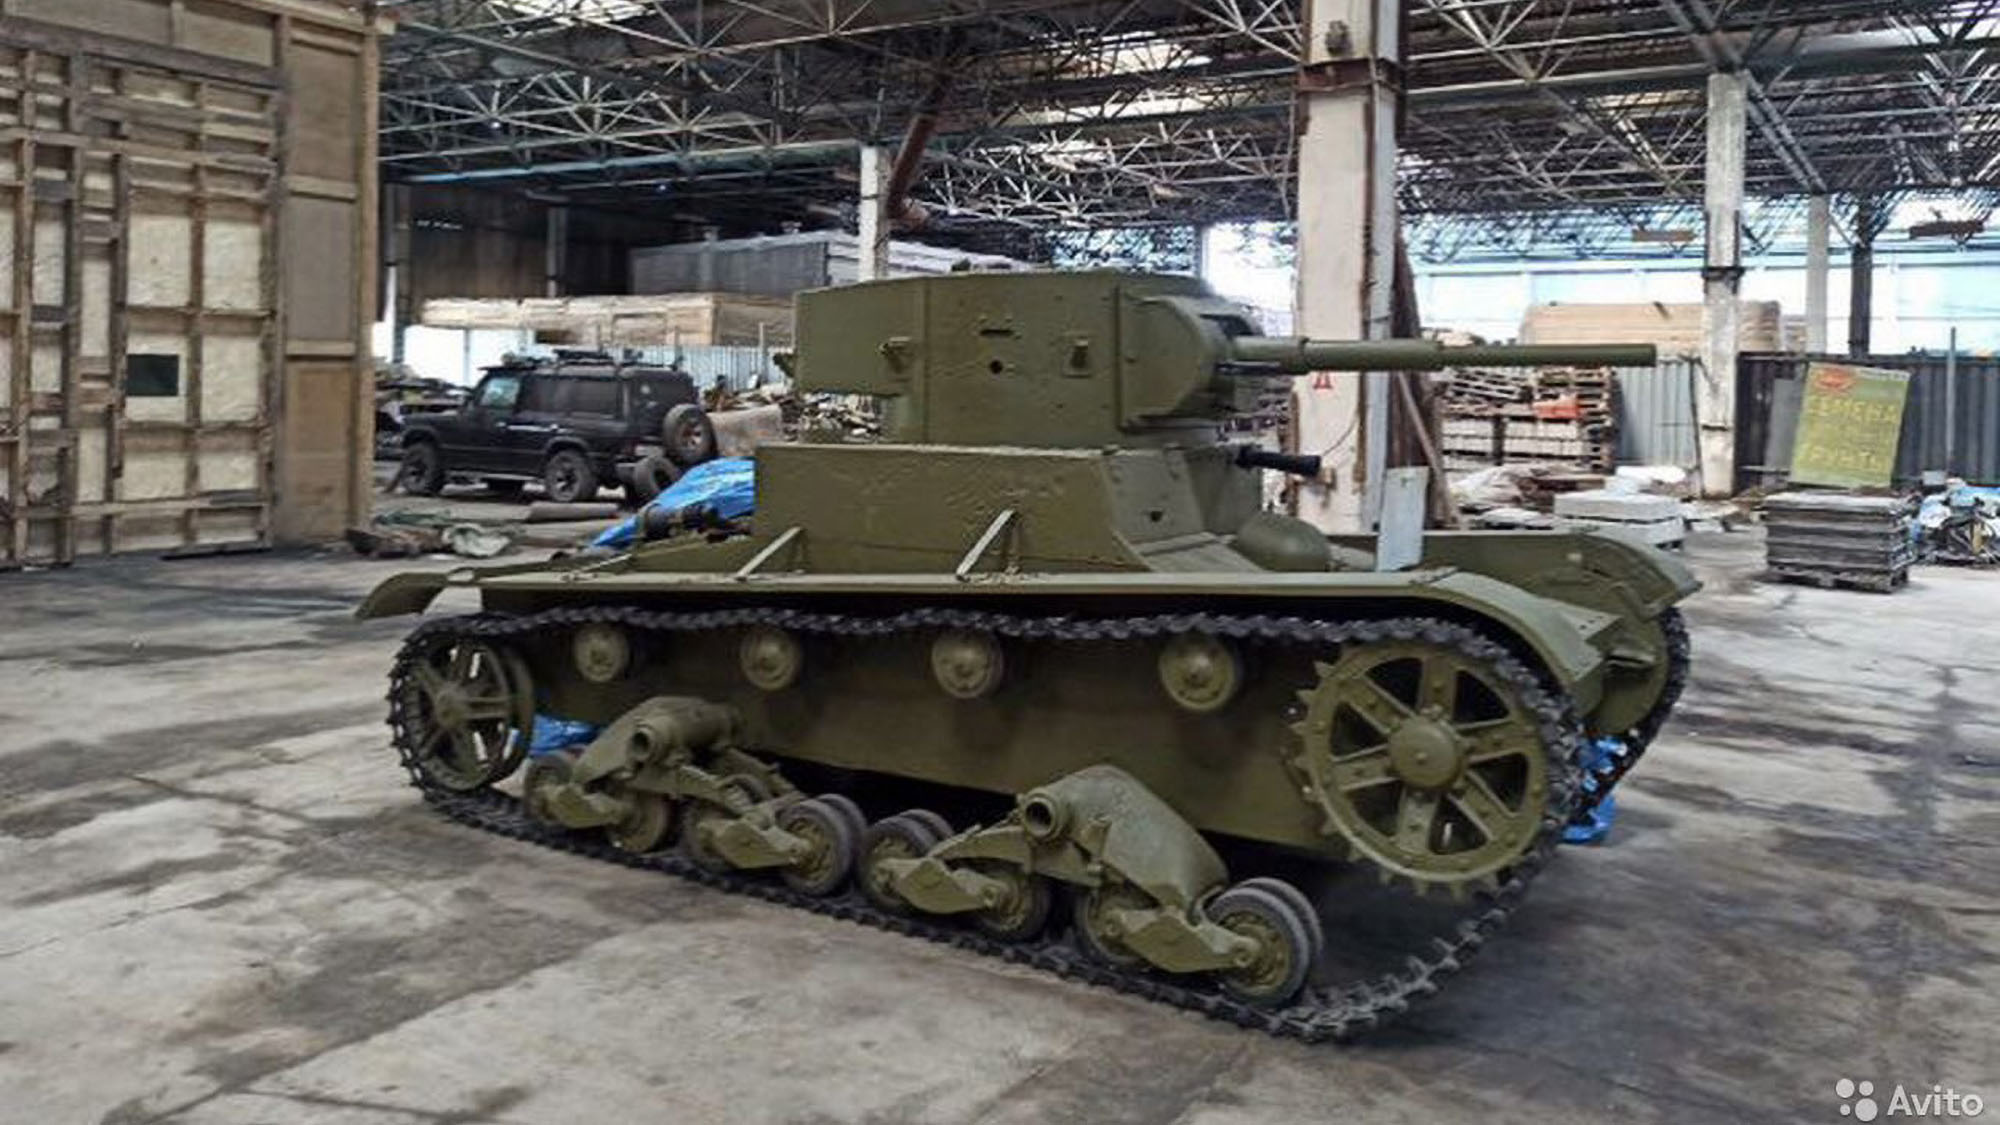 Read more about the article Restored Soviet WWII Tank Goes On Sale For GBP 60K